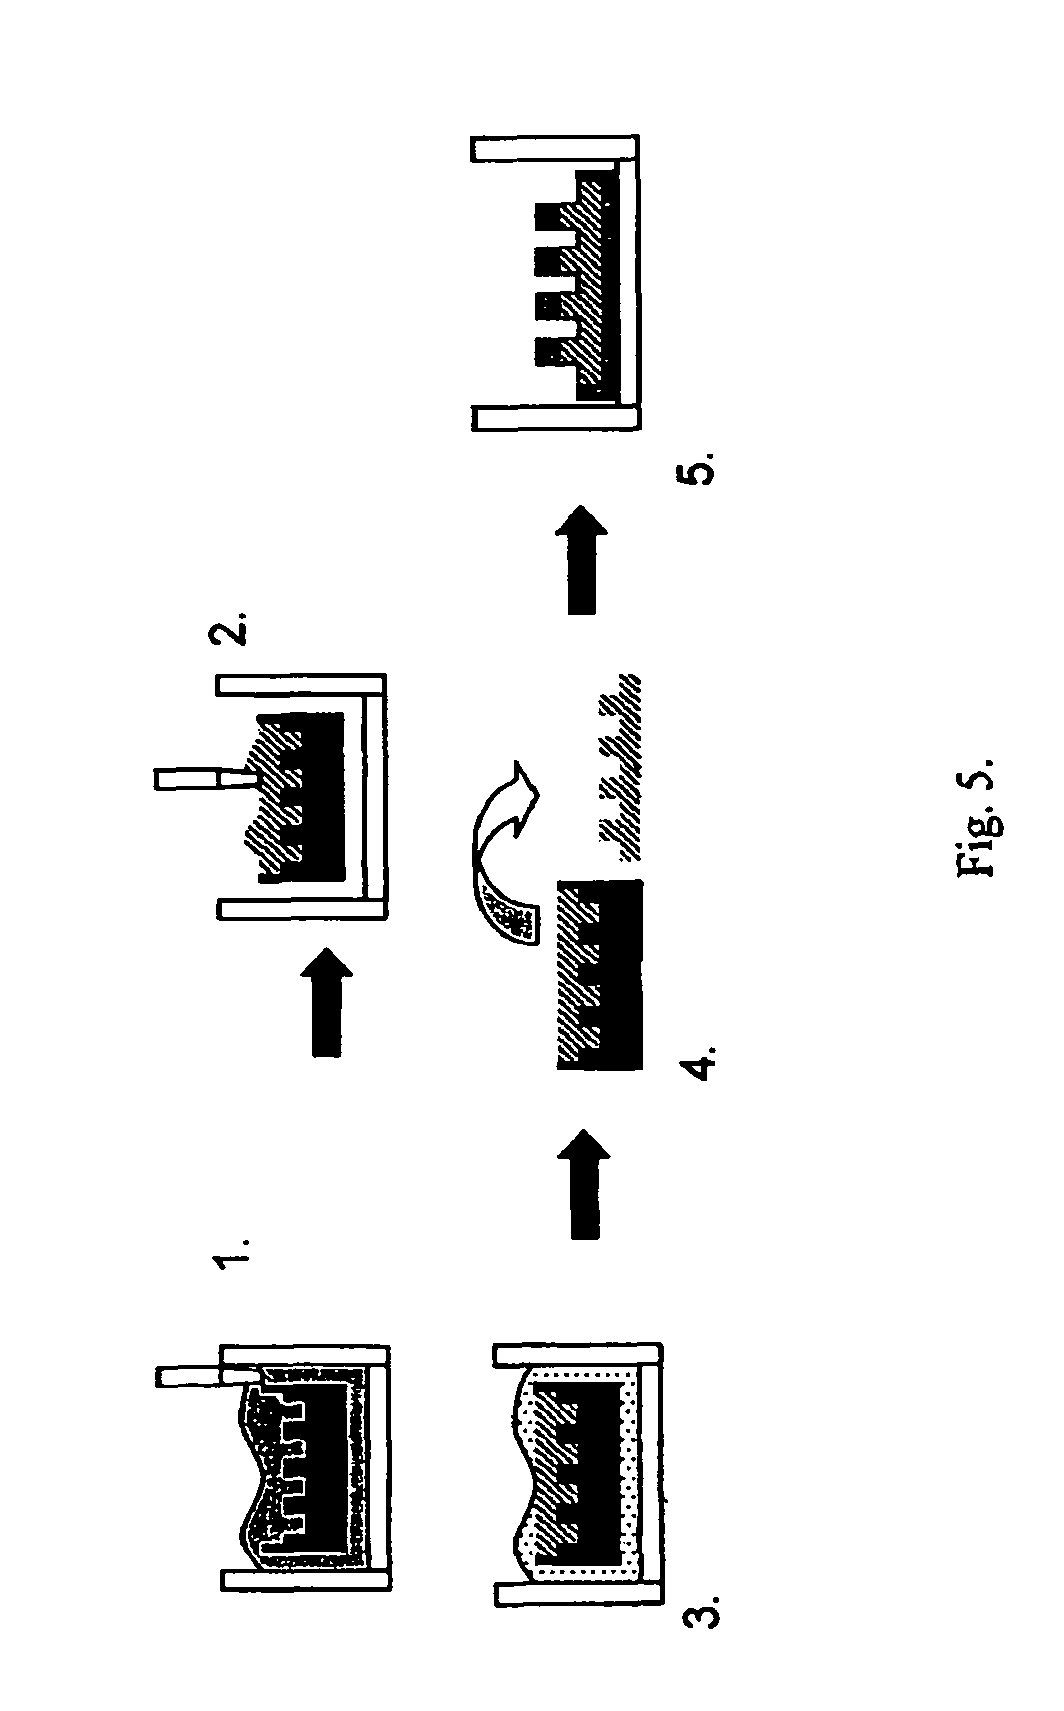 Cell aggregation and encapsulation device and method